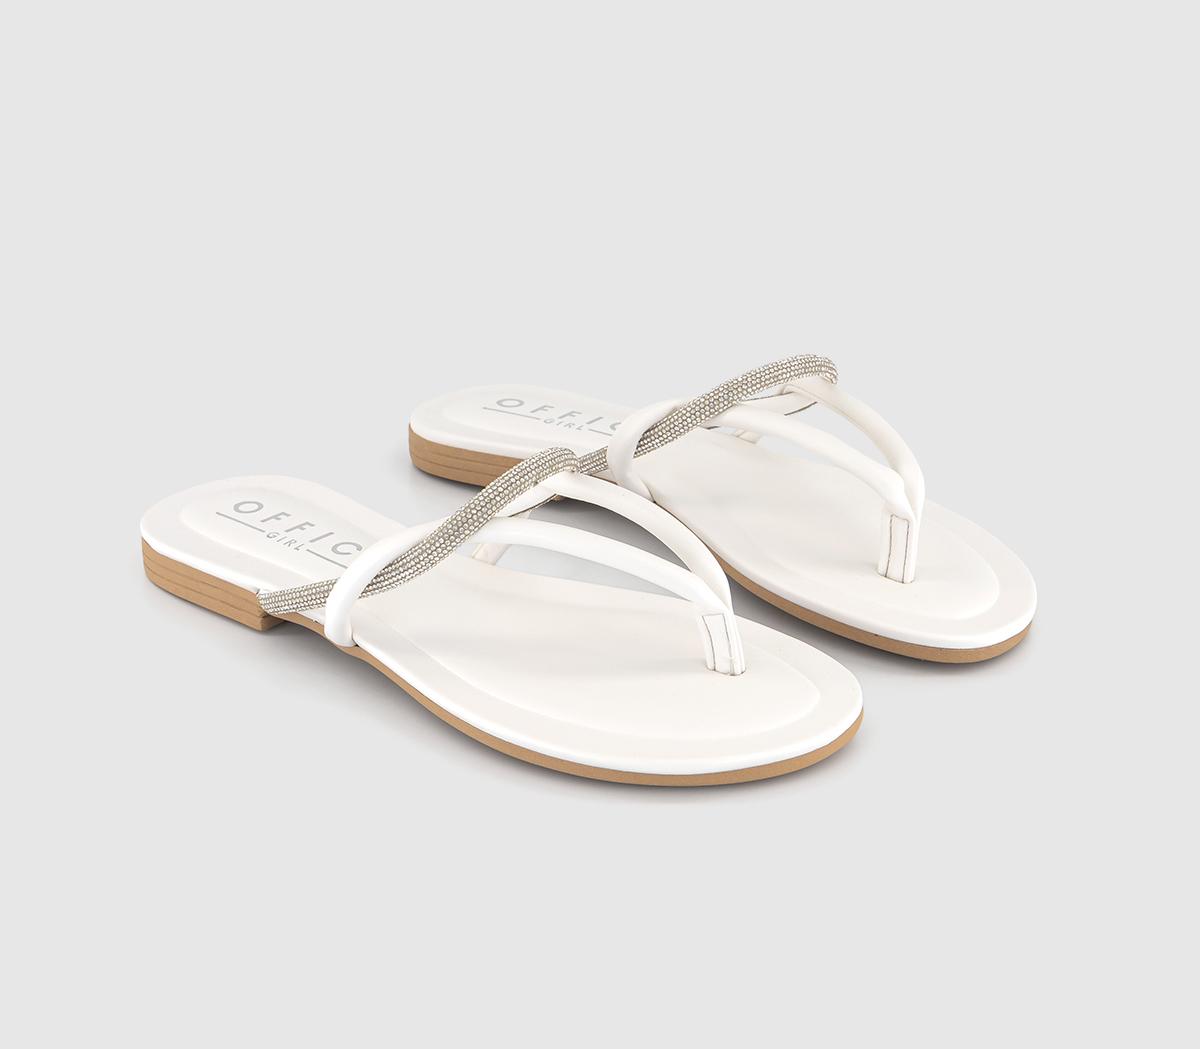 OFFICE Womens So Cute Occasion Toe Thong Sandals White Leather, 5